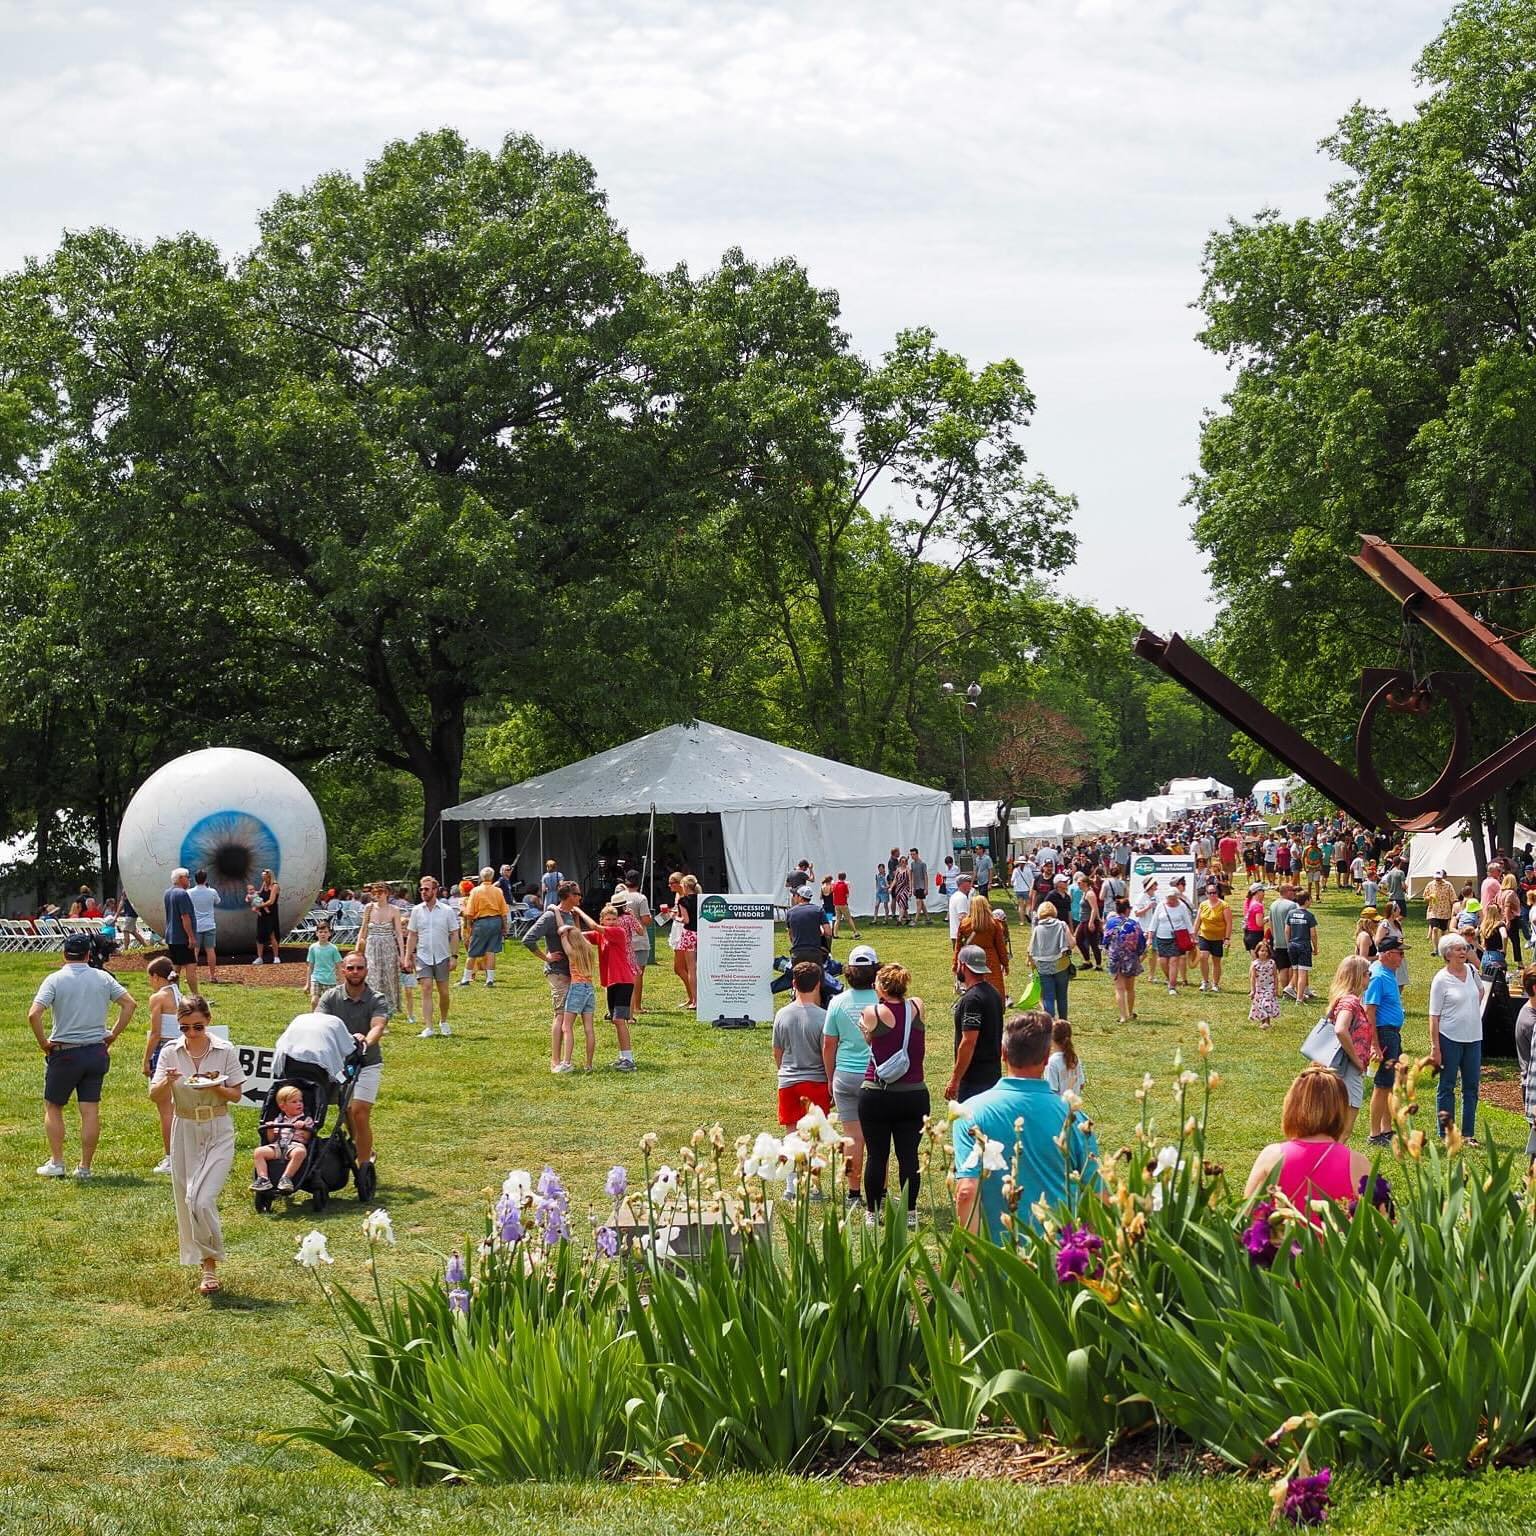 The weather is looking BEAUTIFUL! Come find me at @laumeierstl Art Fair this weekend. 😎

Friday, May 10 / 6&ndash;10 p.m.
Saturday, May 11 / 10 a.m.&ndash;8 p.m.
Sunday, May 12 / 10 a.m.&ndash;5 p.m.

EVENT ADMISSION

$10 / Ages 11 and up
Ages 10 an